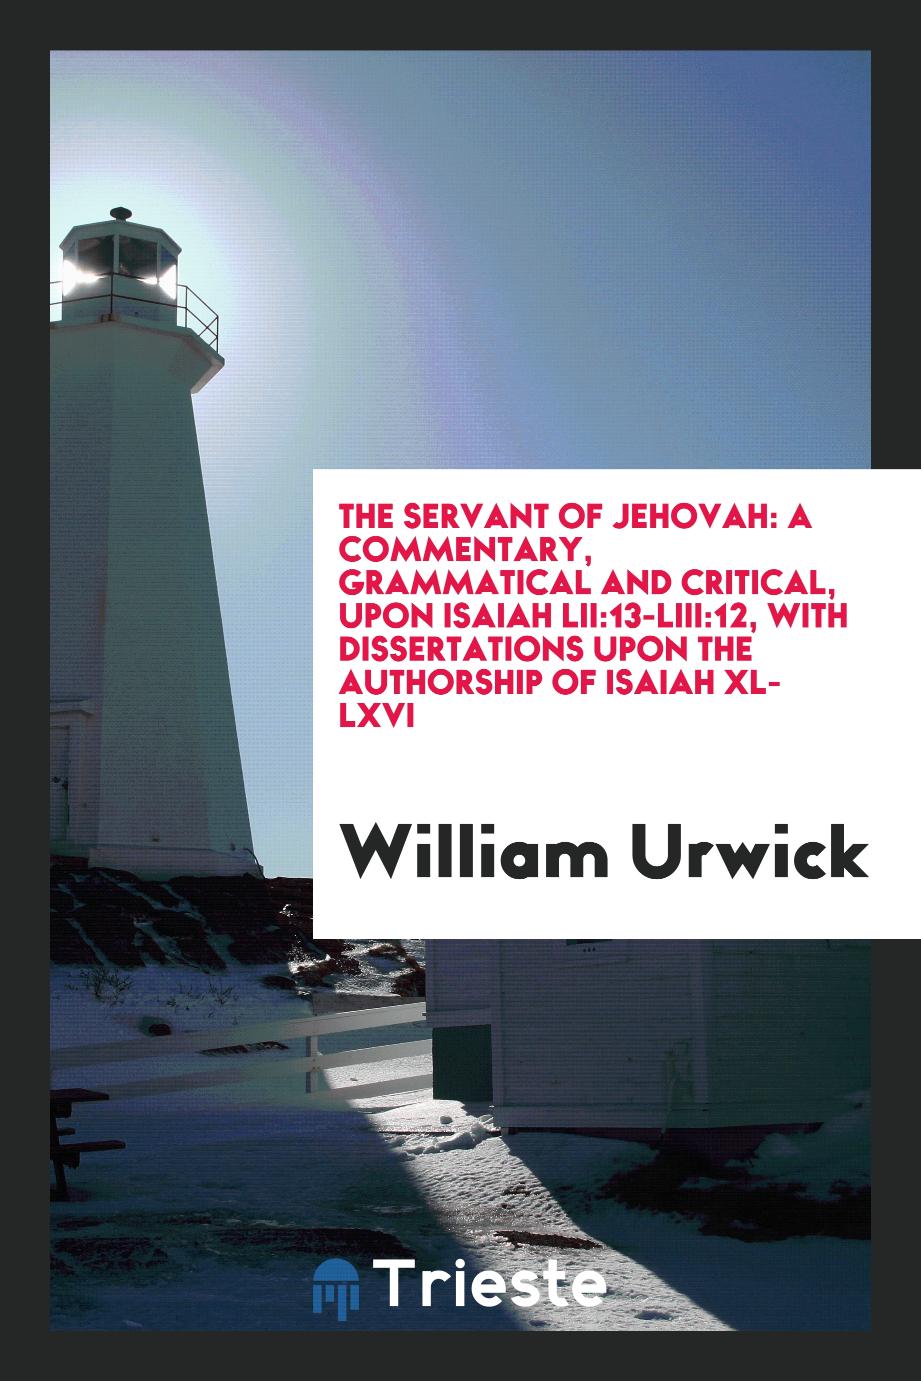 The servant of Jehovah: a commentary, grammatical and critical, upon Isaiah LII:13-LIII:12, with dissertations upon the authorship of Isaiah XL-LXVI